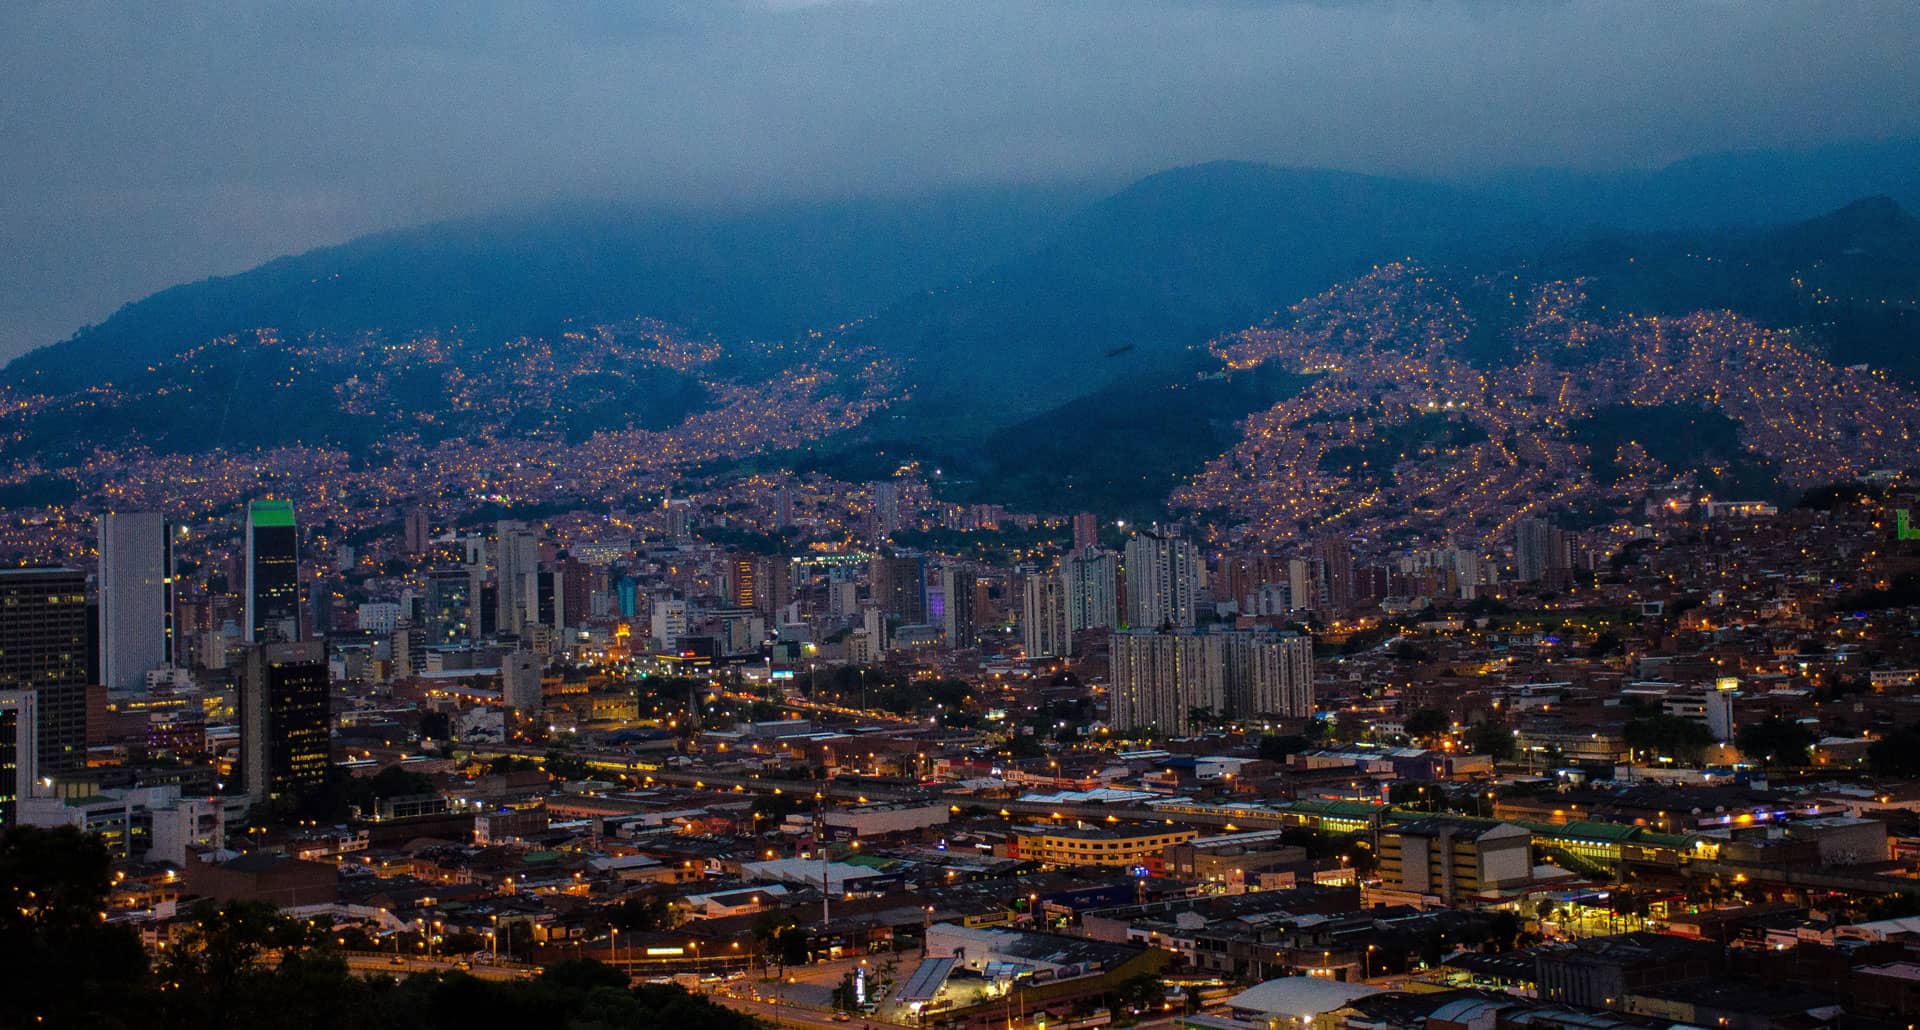 Aerial shot of the Medellin, Columbia skyline with mountains in background.